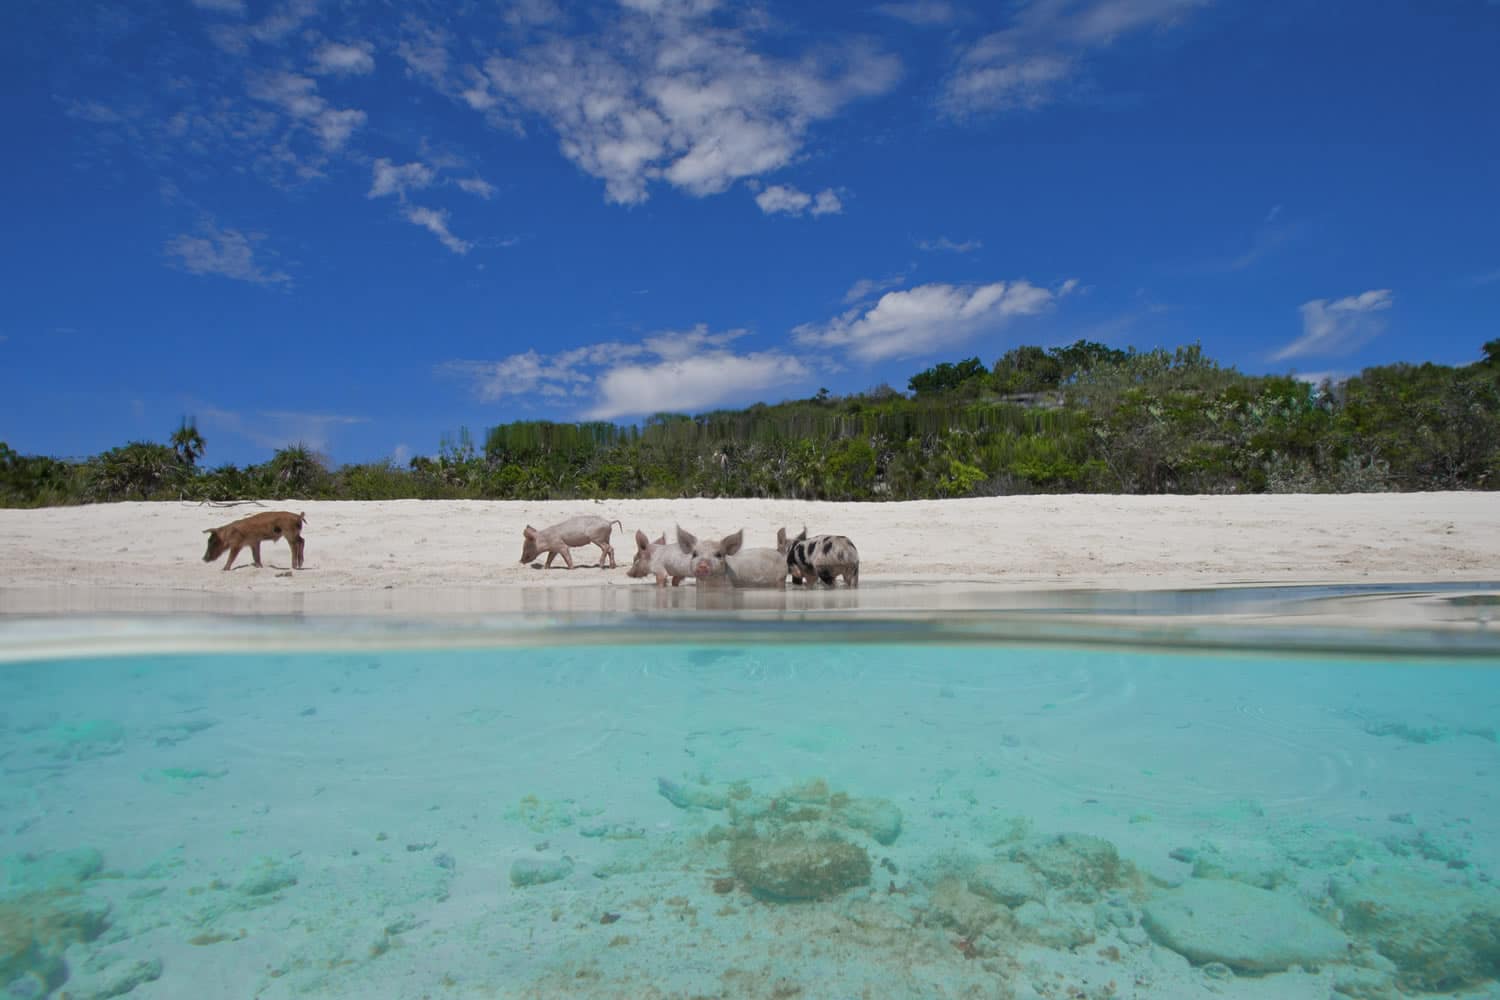 A group of cows are swimming in the water near Staniel Cay, a sandy beach.